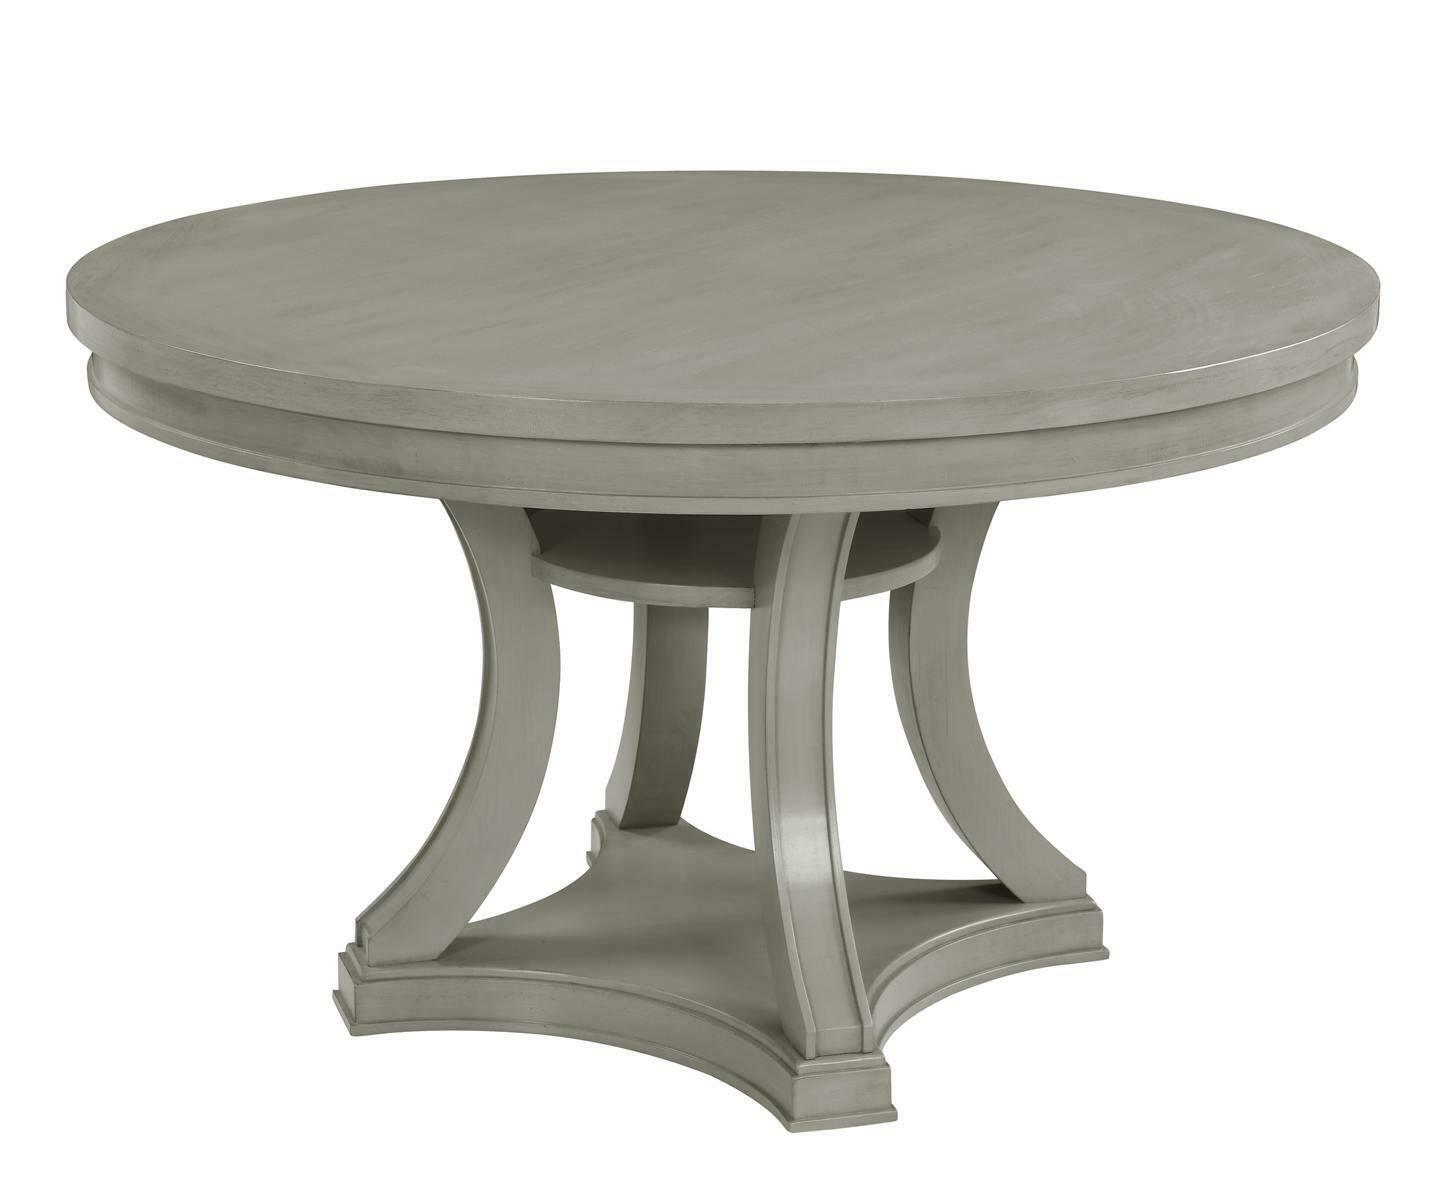 Dining Table Kitchen Table Wilhelminian Style Round Table Design Luxury Furniture